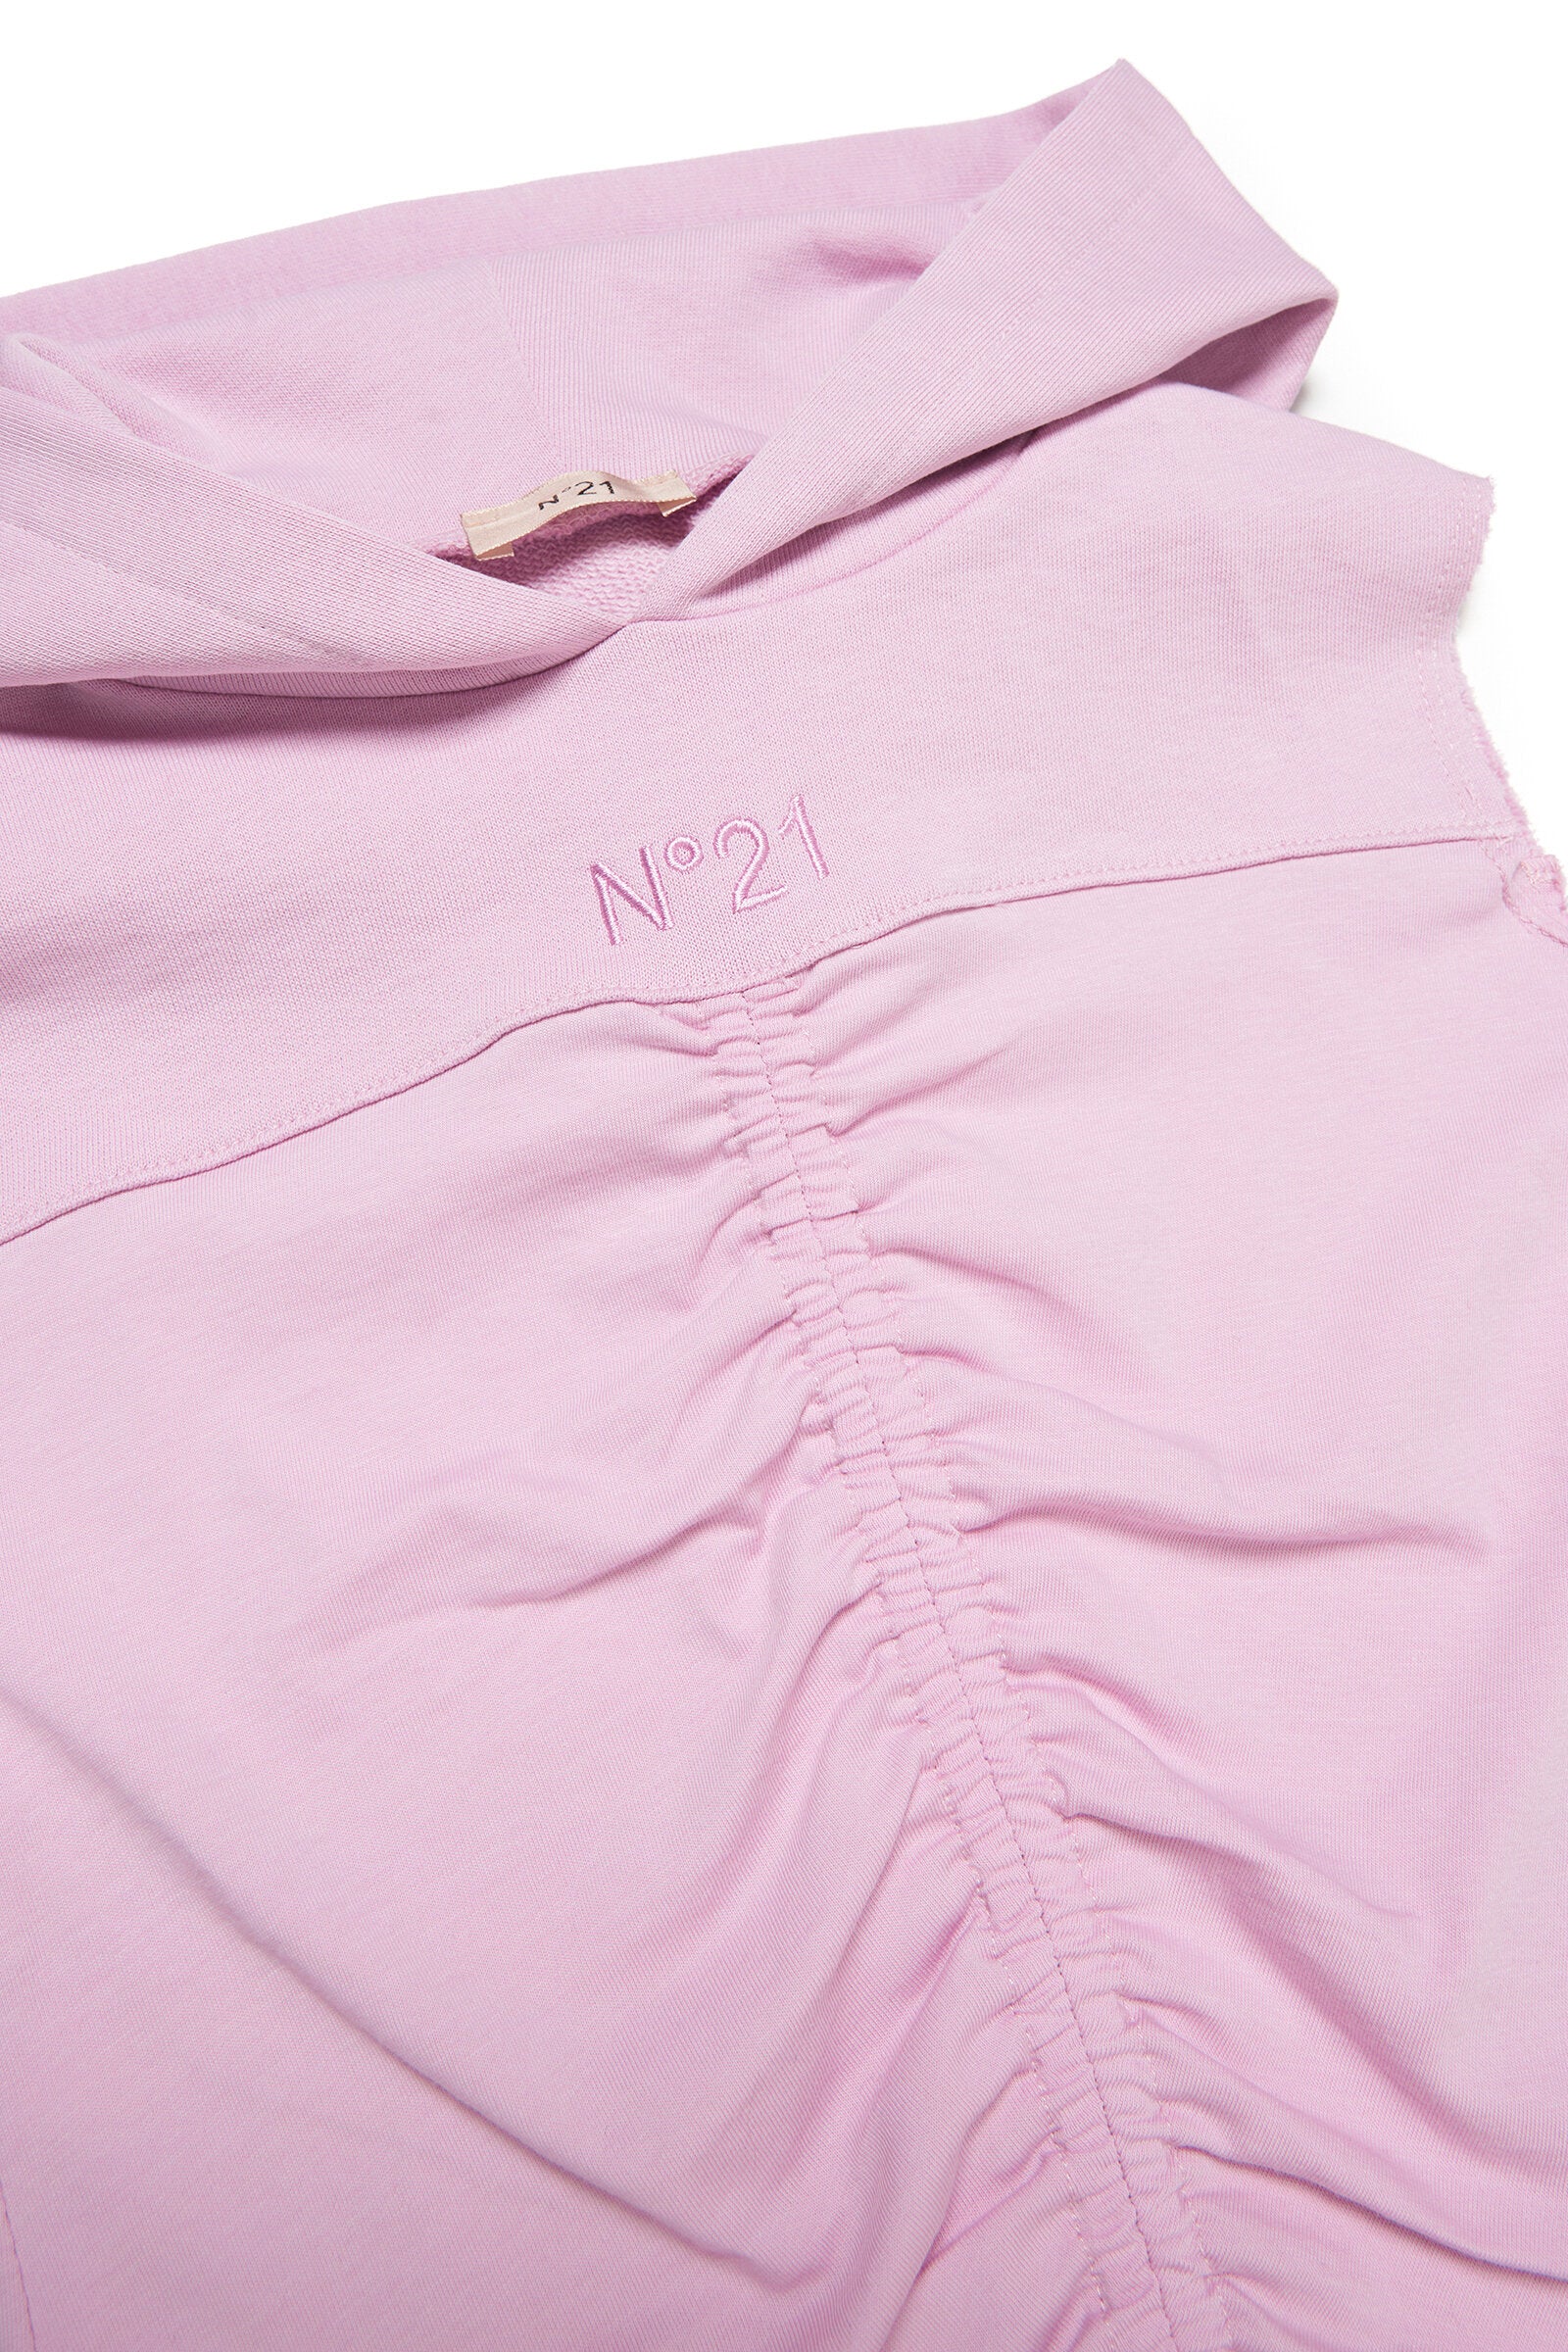 Pink sleeveless jersey t-shirt with hood and seam at front